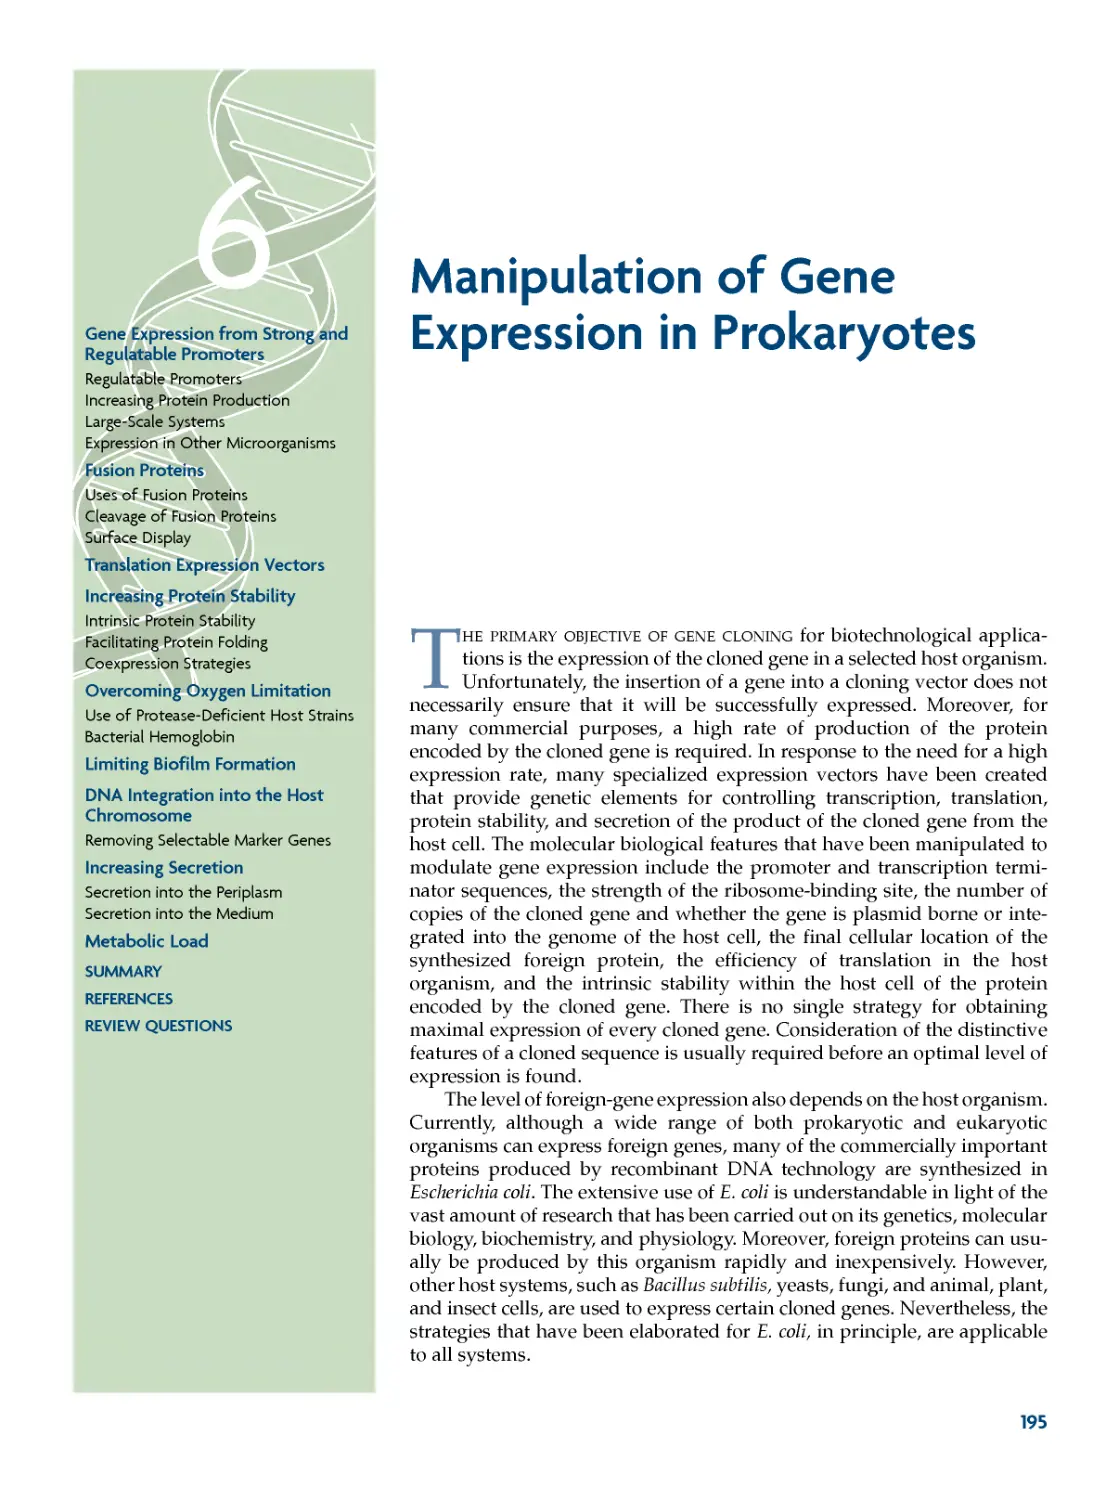 Chapter 6 Manipulation of Gene Expression in Prokaryotes